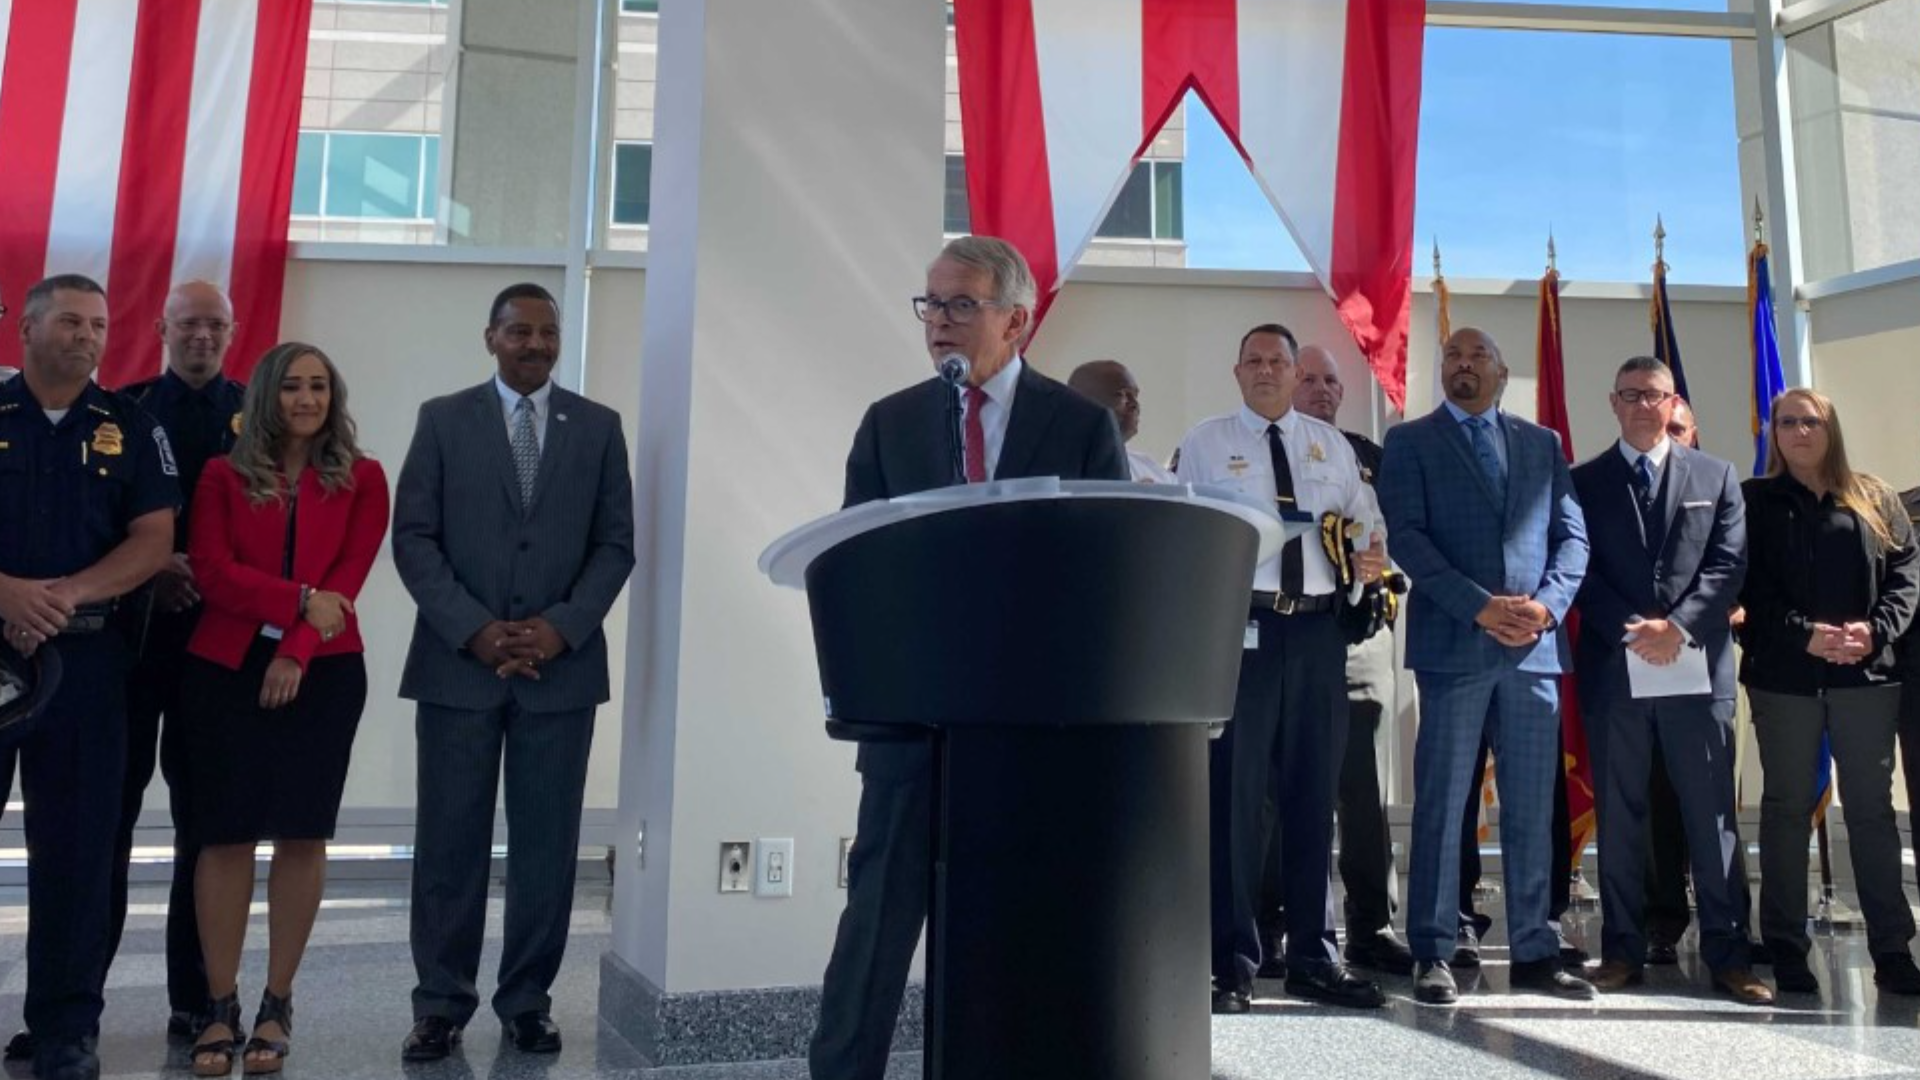 DeWine announced the pilot program Wednesday, and 11 law enforcement agencies have already expressed interest in participating.